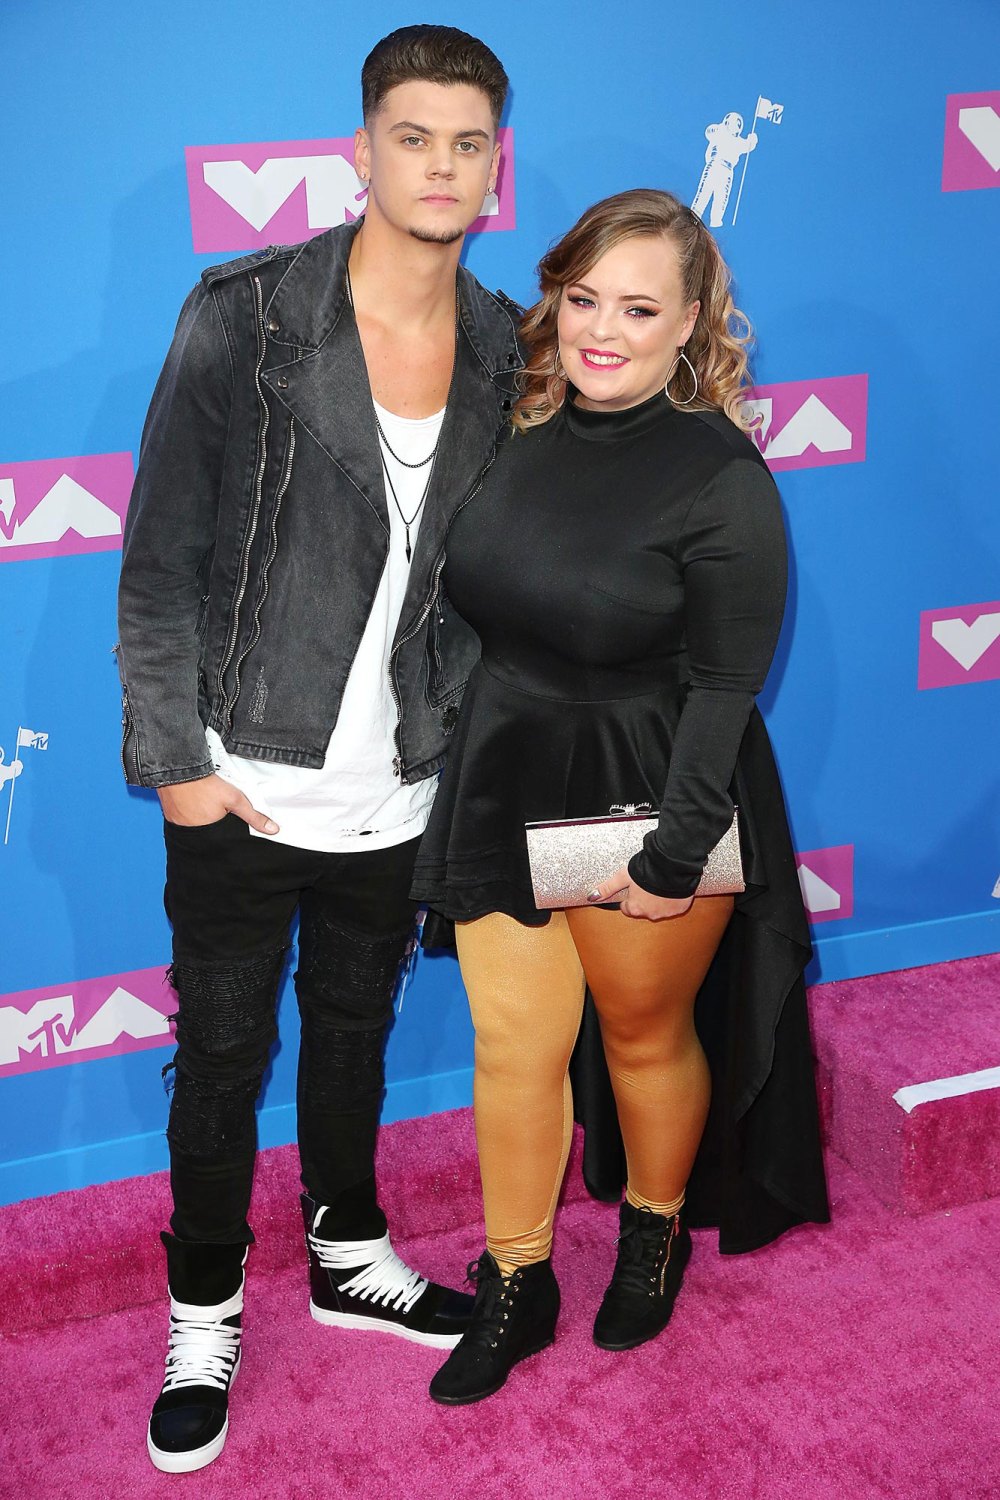 Teen Mom s Tyler Baltierra Starts OnlyFans Account After Weight Loss — With Wife Catelynn s Blessing 292